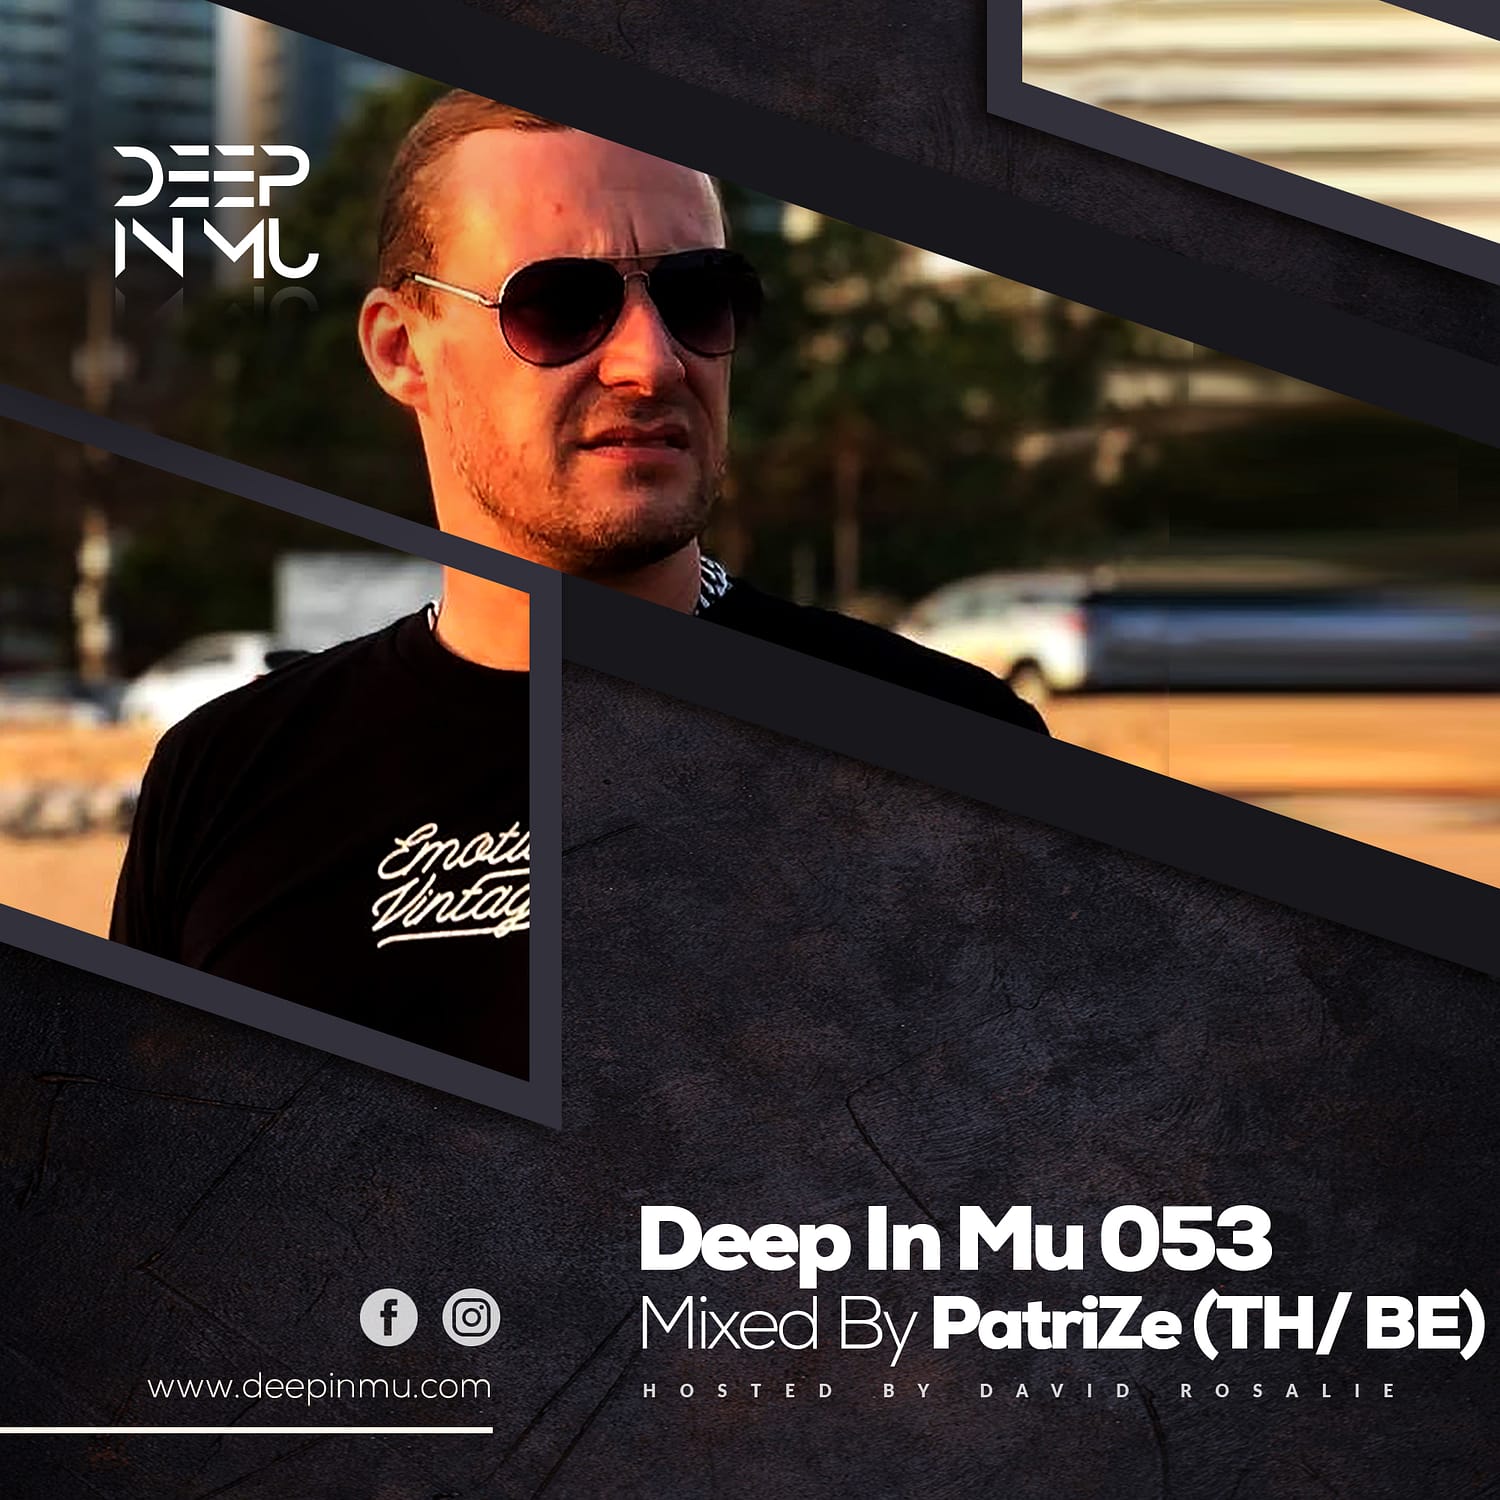 Deep in Mu 053 Mixed by PatriZe (BE)